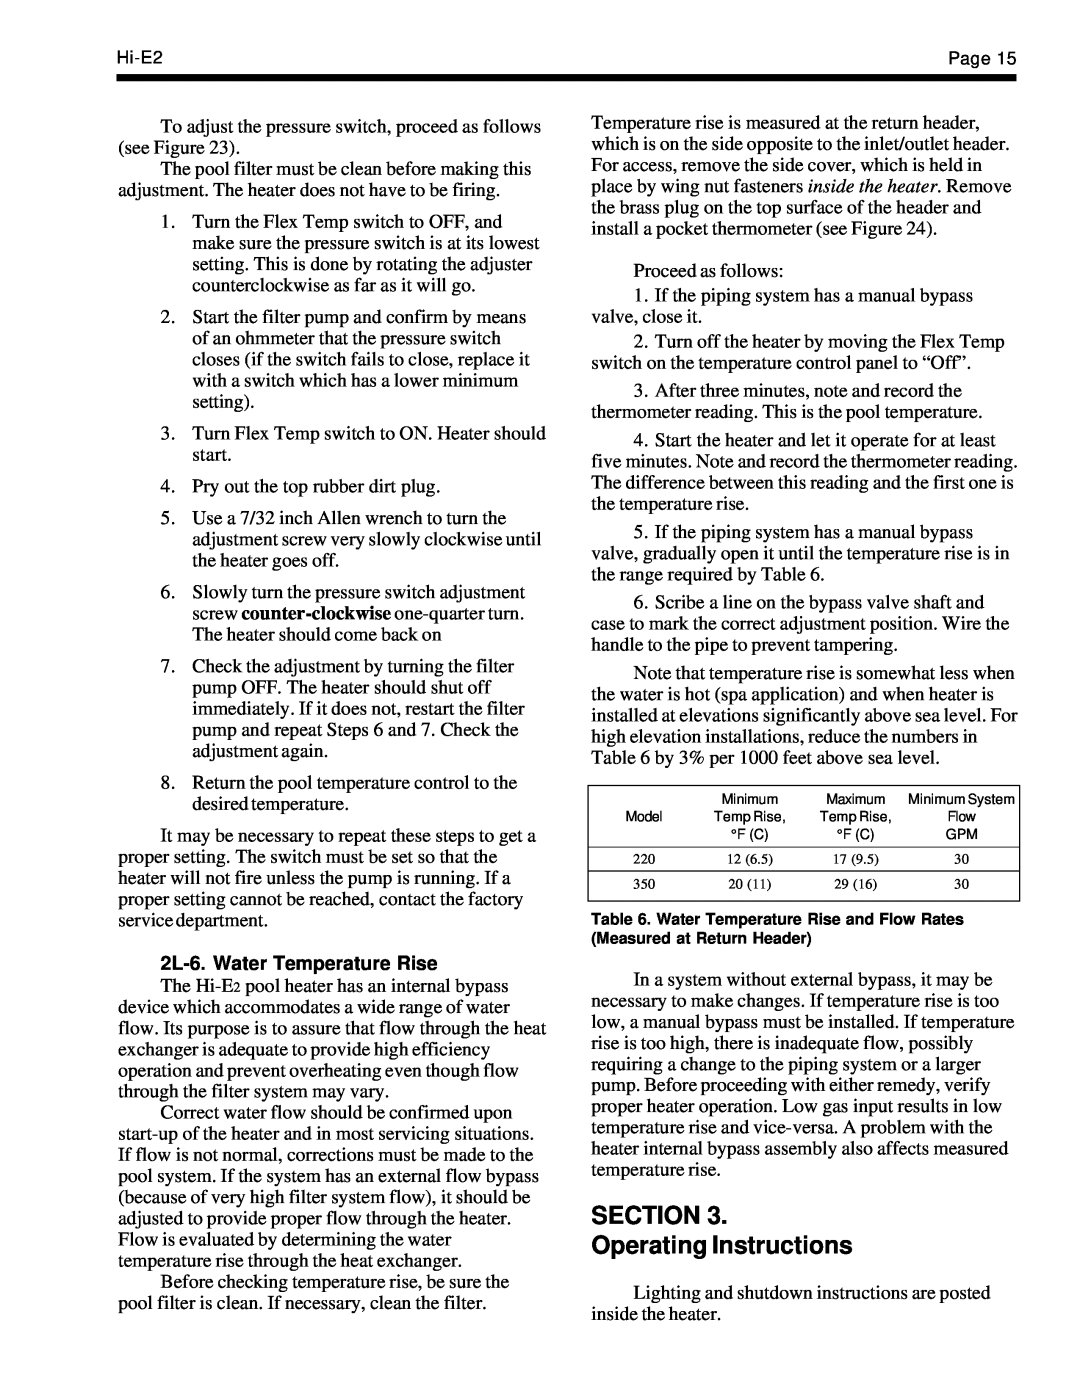 Teledyne EHE warranty SECTION Operating Instructions, 2L-6.Water Temperature Rise 